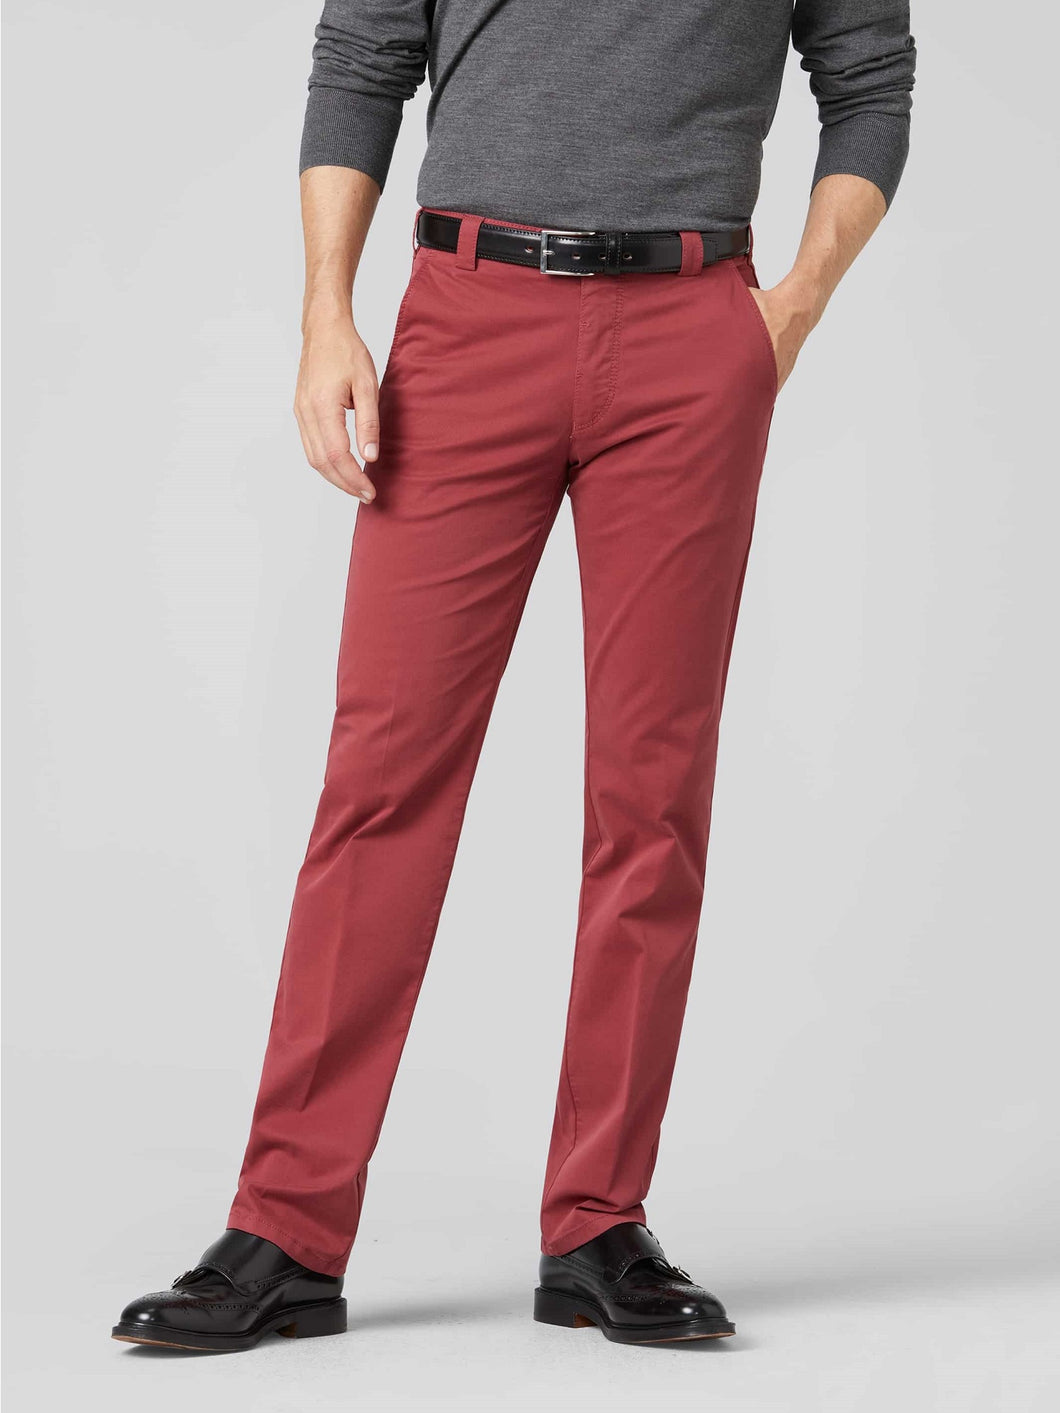 MEYER Roma Trousers - 3001 Light-Weight Cotton Chinos - Red